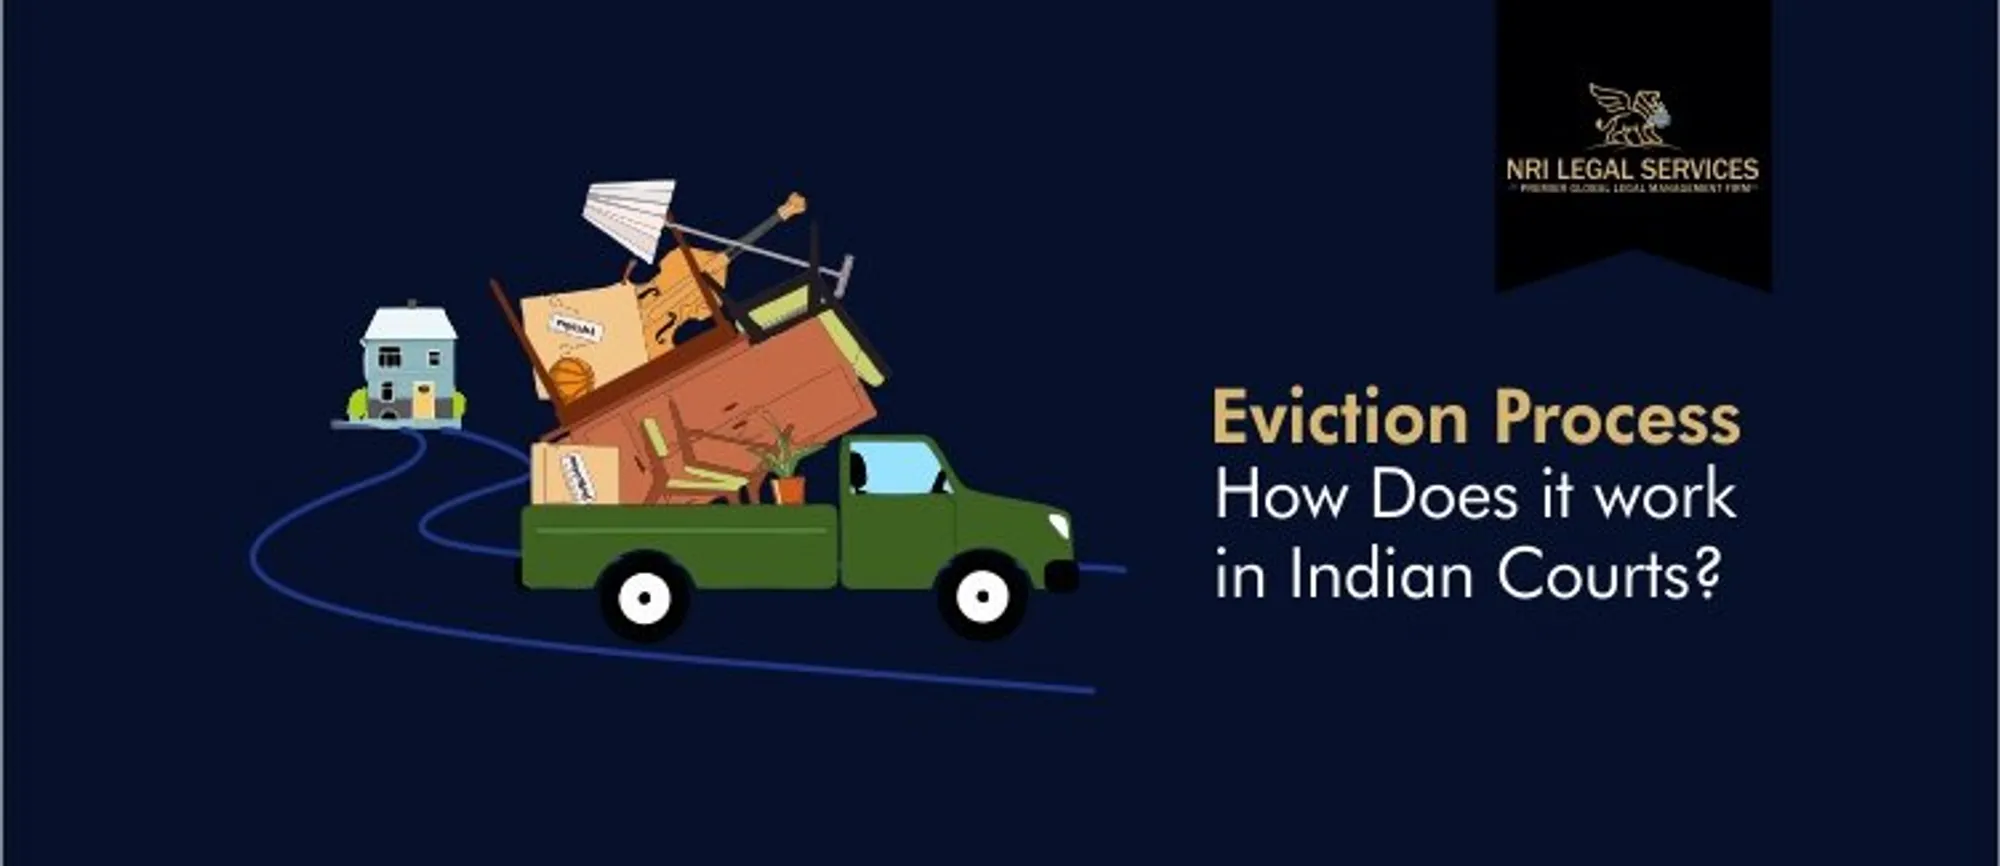 Steps of the Eviction Process: How Does Eviction Work in Indian Courts?